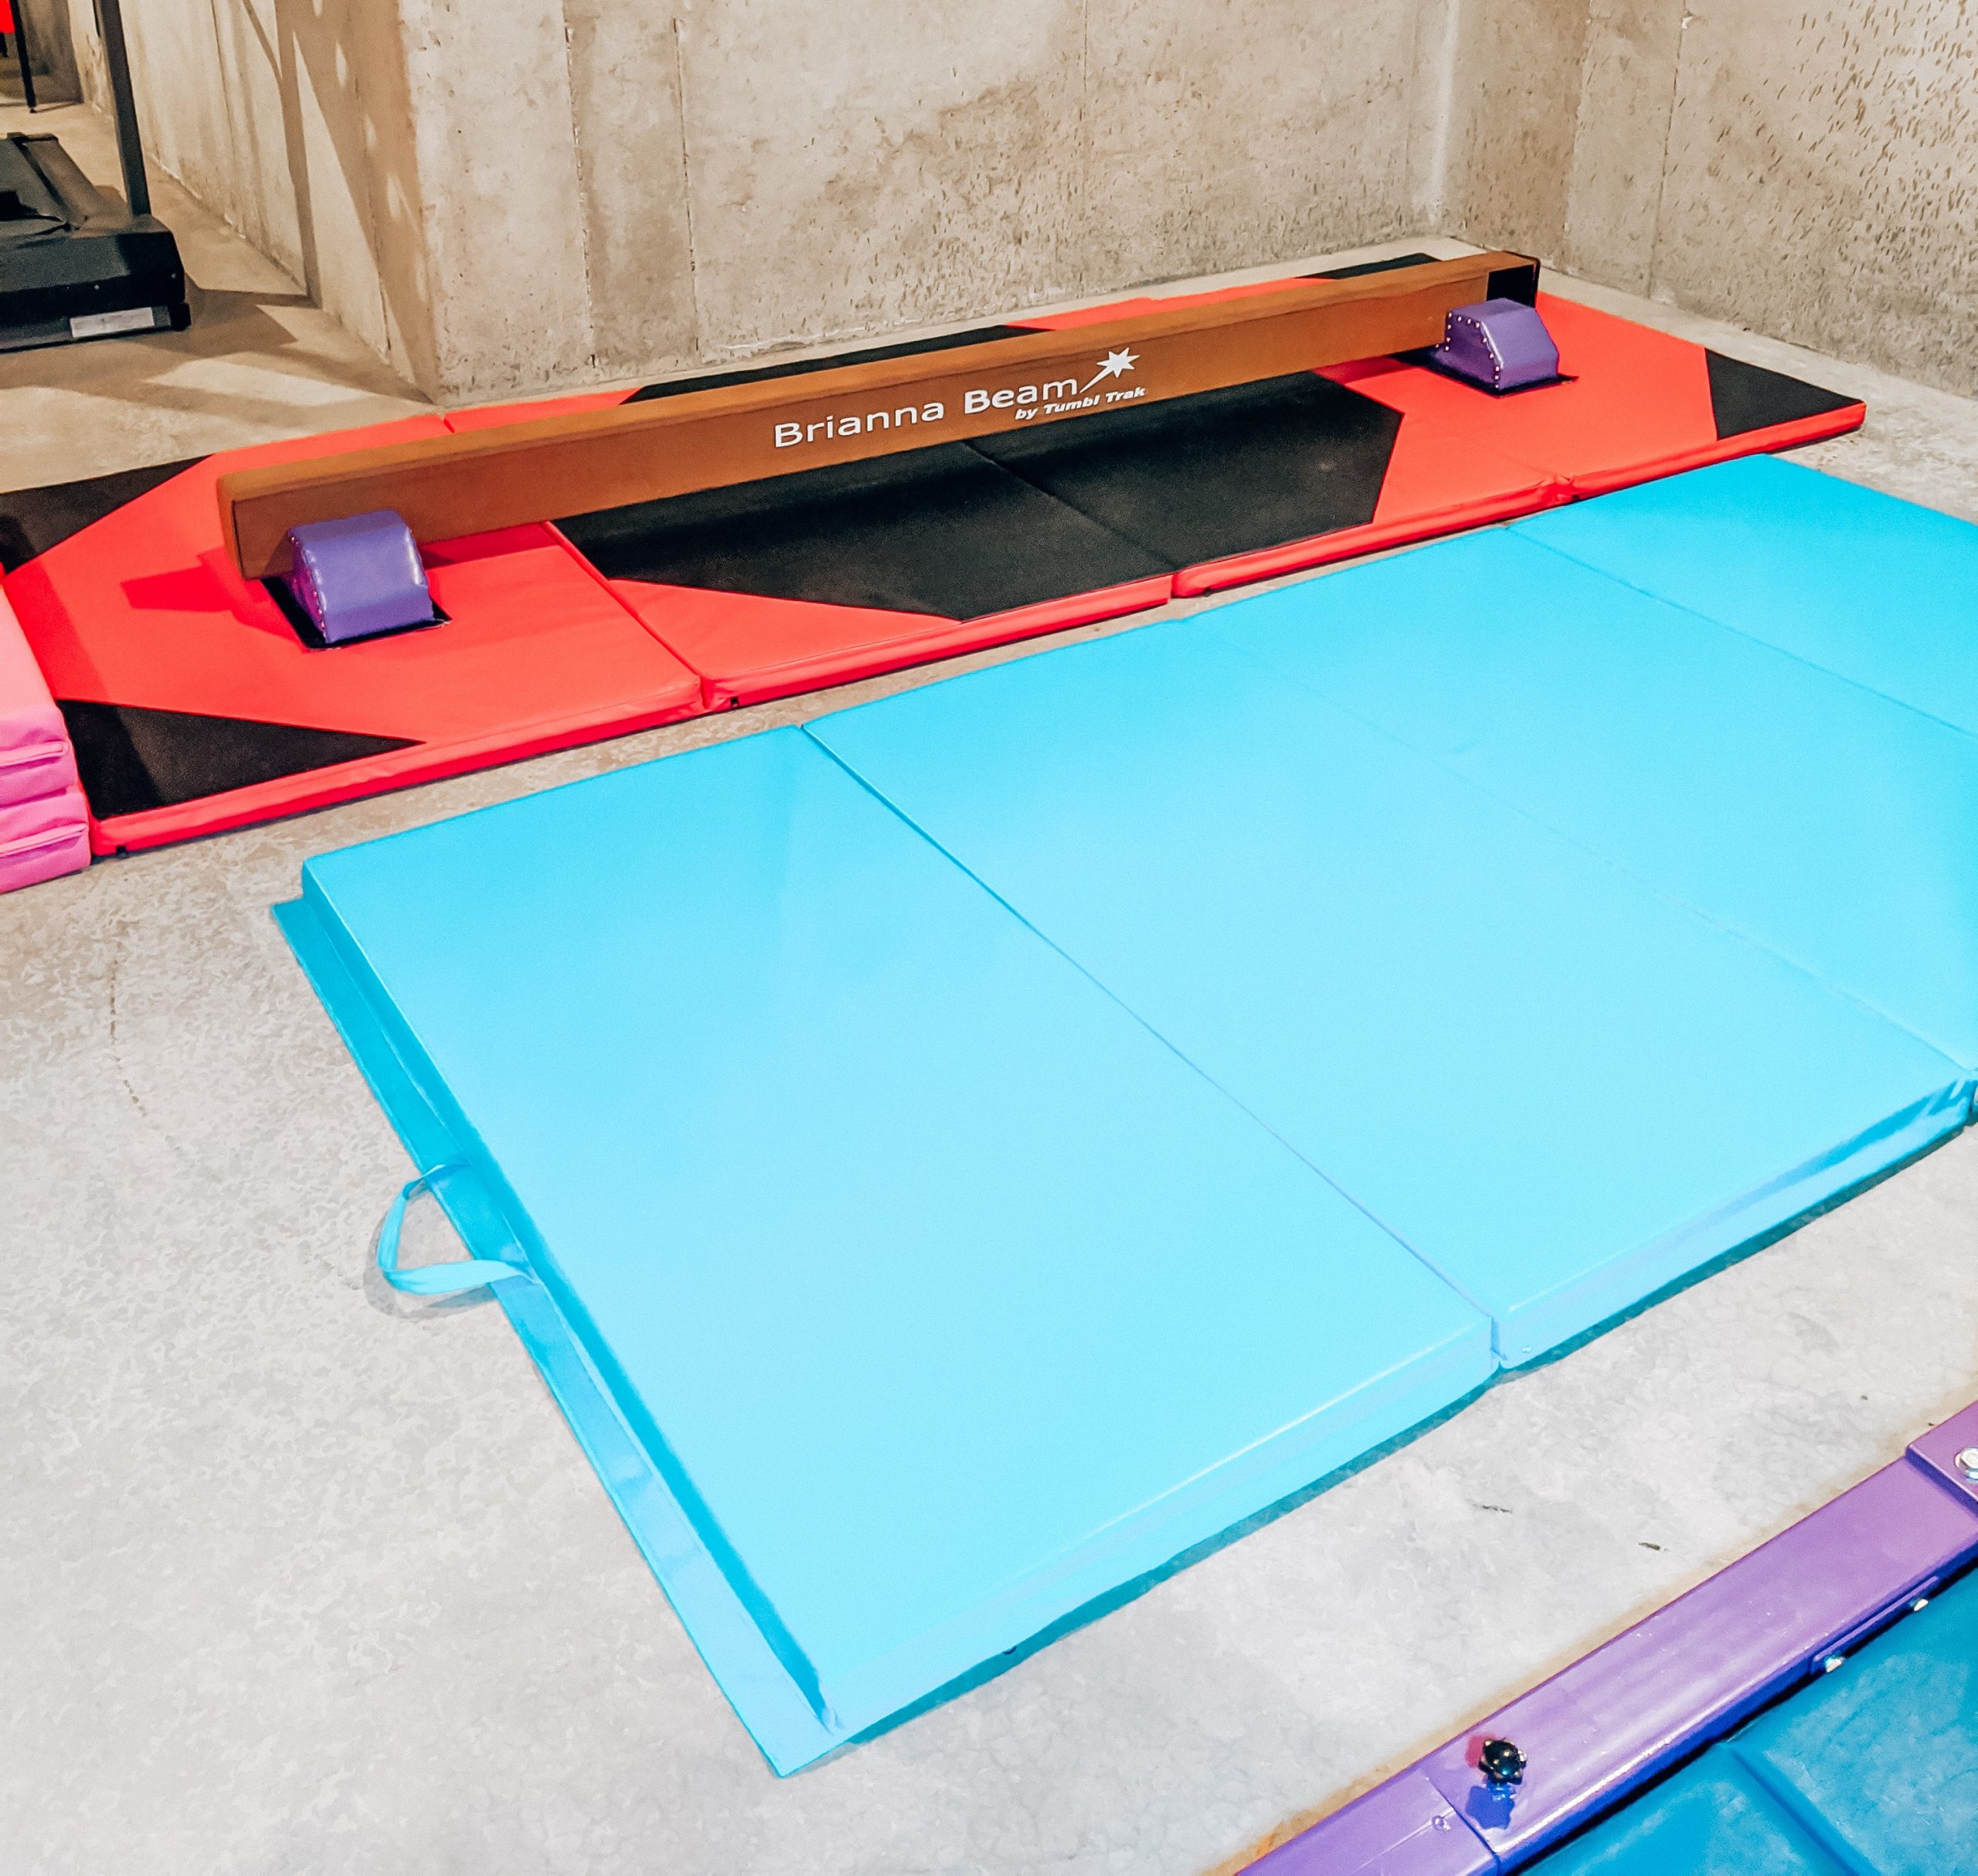 Best Gymnastics Equipment for Home - Home Gymnastics Setup - Home Gymnastics Equipment: Kansas City blogger Tricia Nibarger shows the best gymnastics equipment for home with her family's home gymnastics setup! #gymnastics #littlegymnast #gymnast 